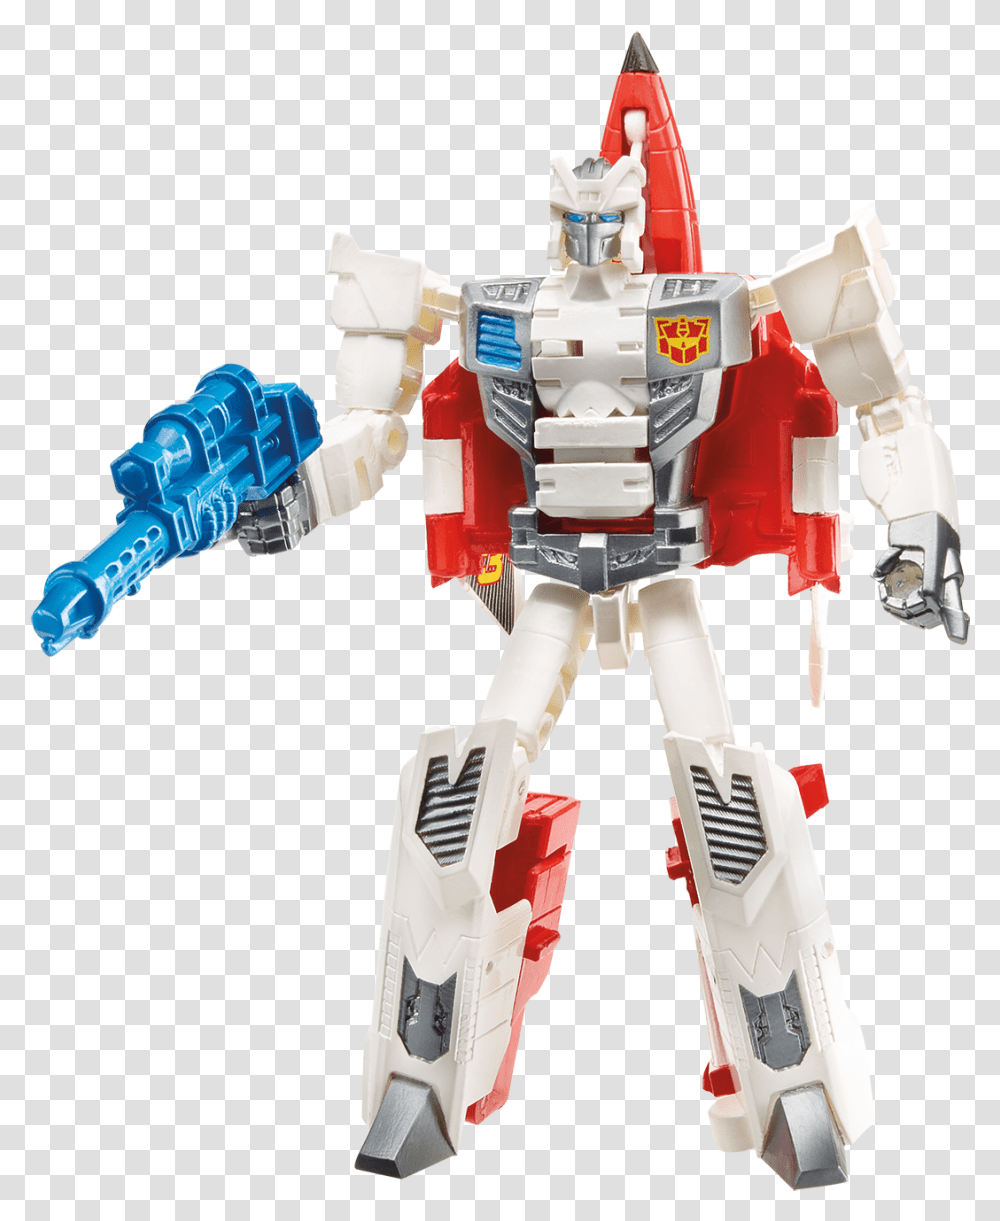 Hasbro Transformers Combiner Wars G2 Combiner Wars Fire Fly, Toy, Robot Transparent Png